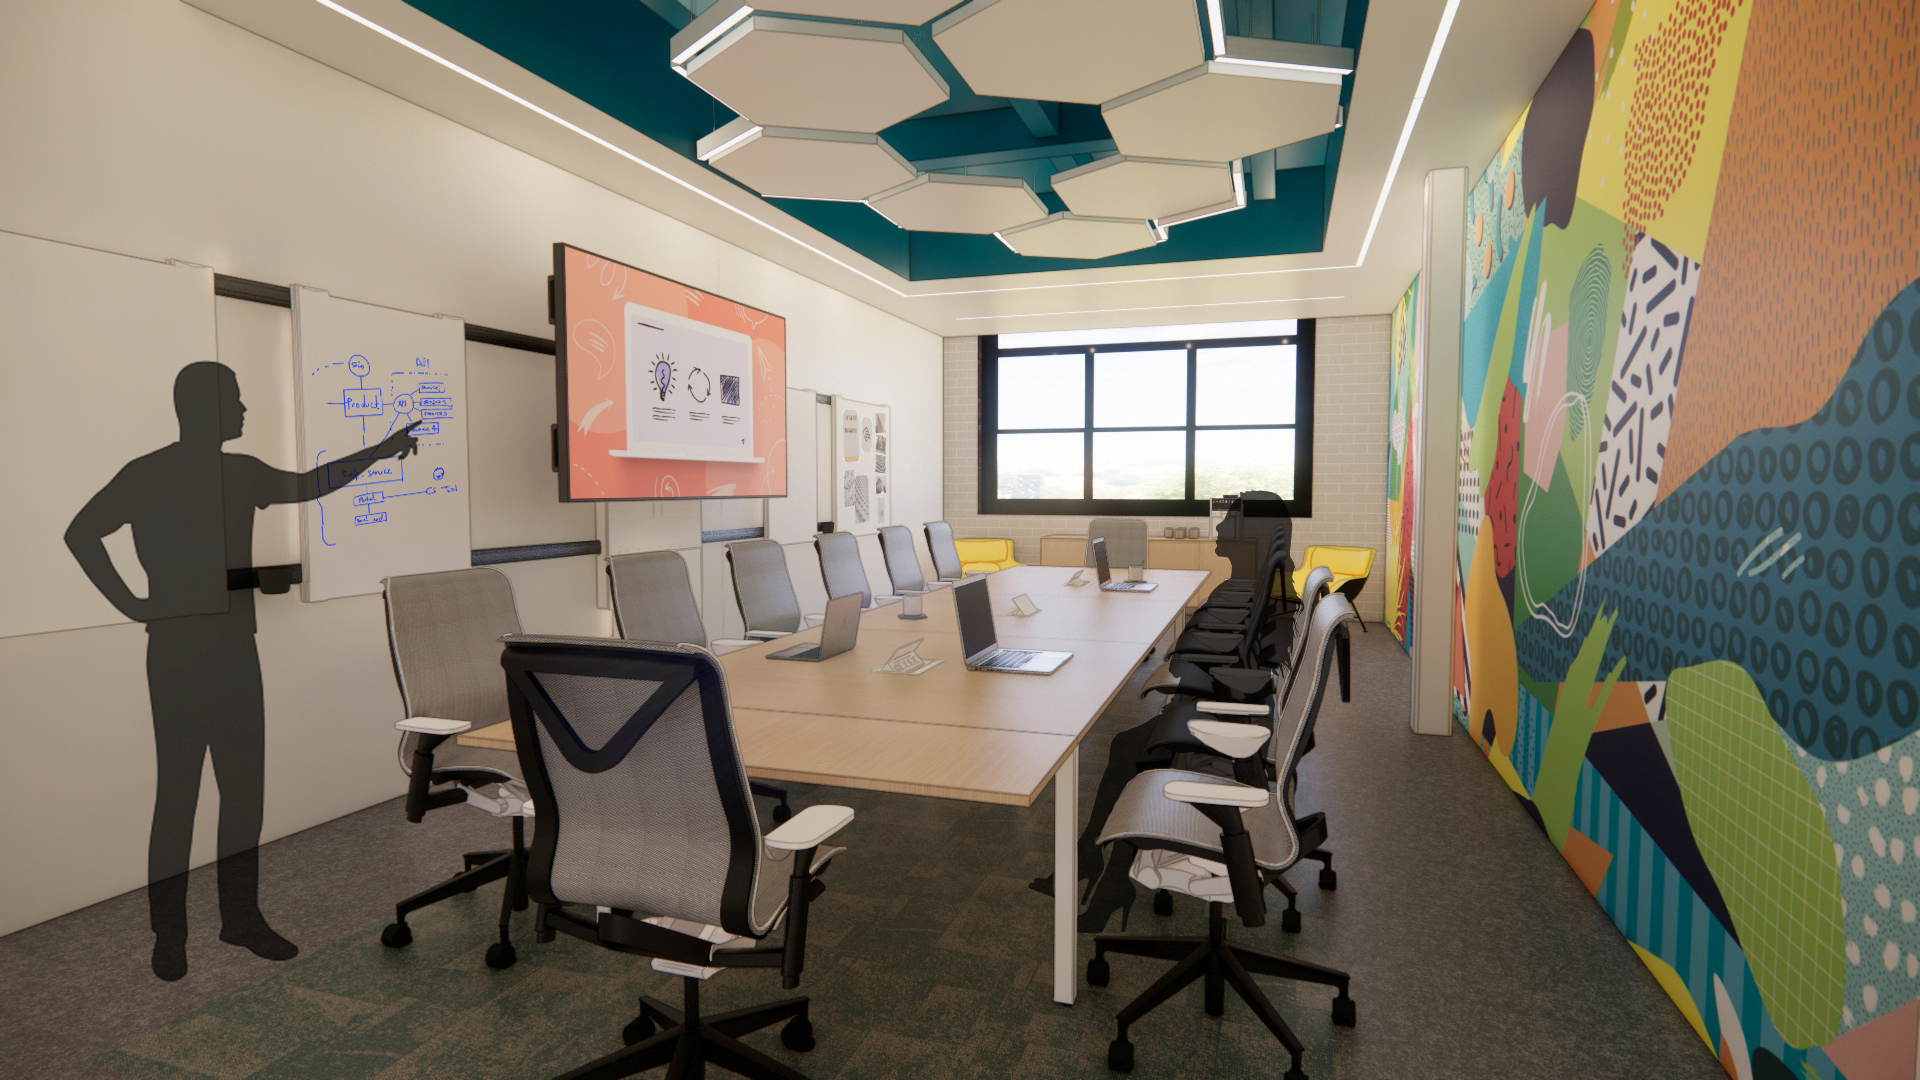 A rendering of a conference room with a mural on the wall.